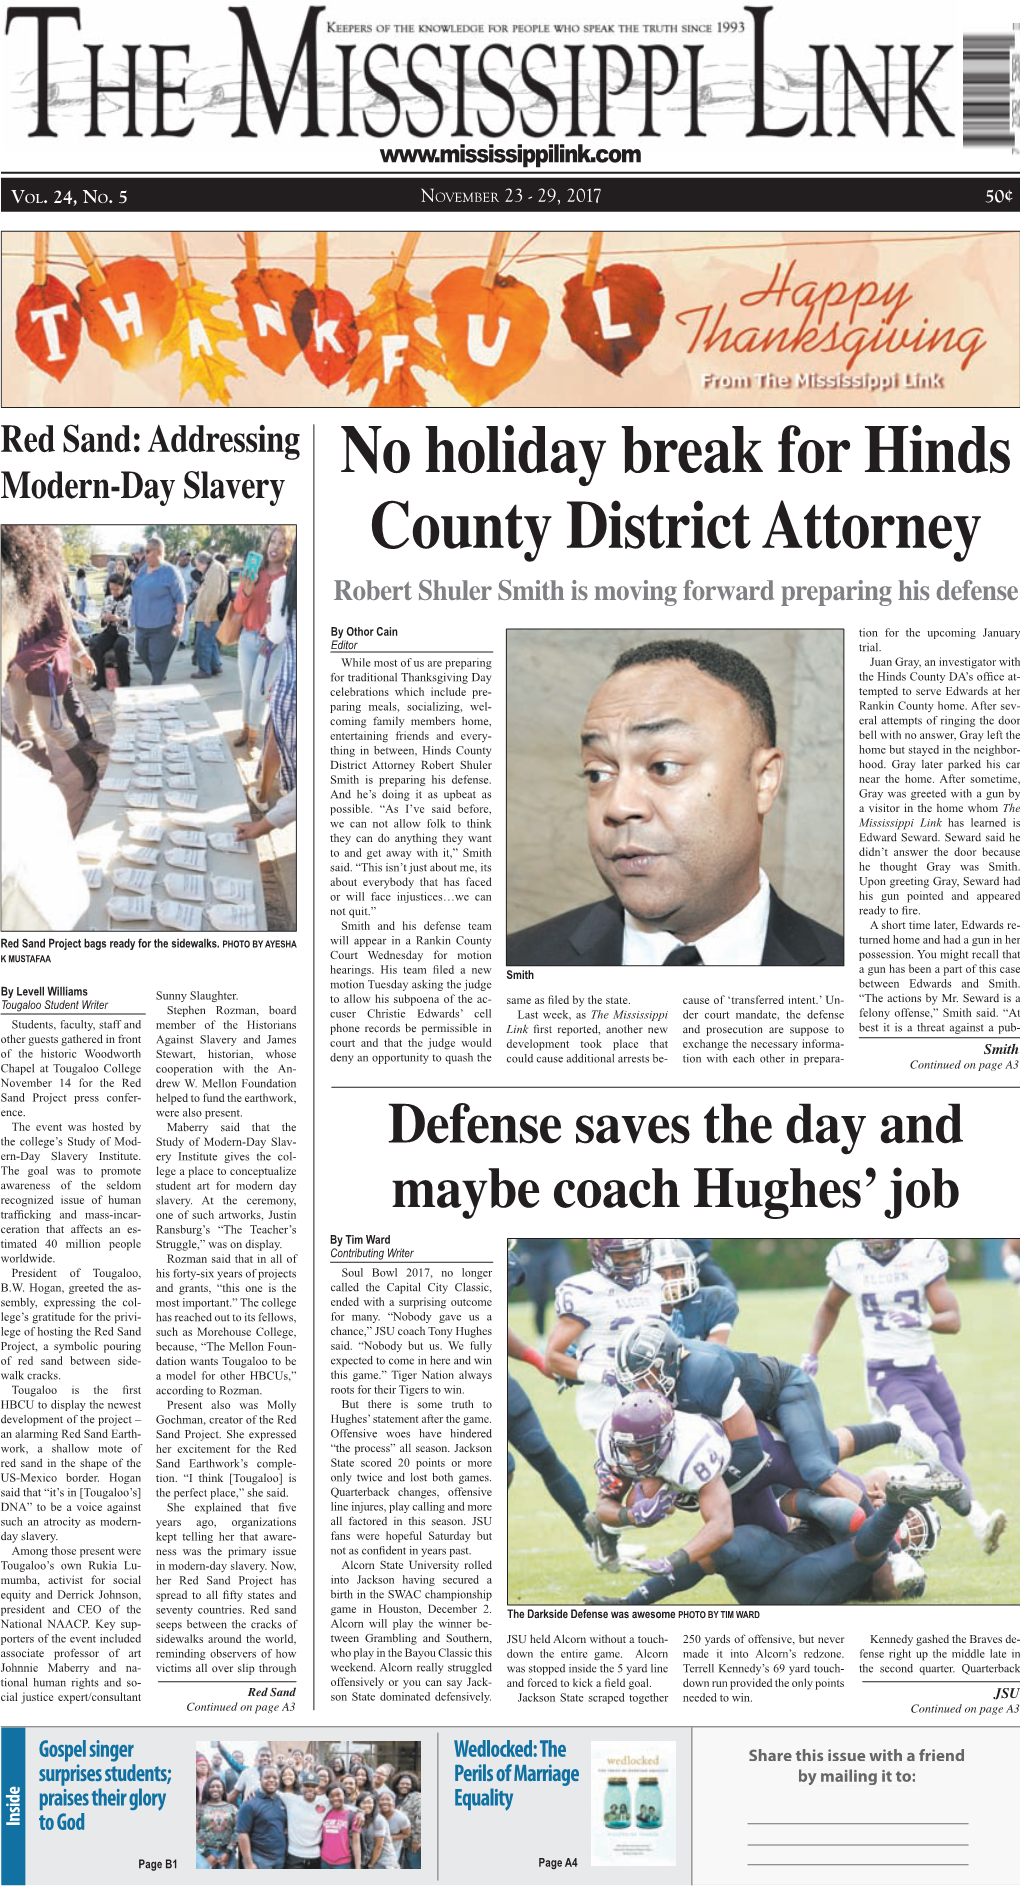 No Holiday Break for Hinds County District Attorney Robert Shuler Smith Is Moving Forward Preparing His Defense